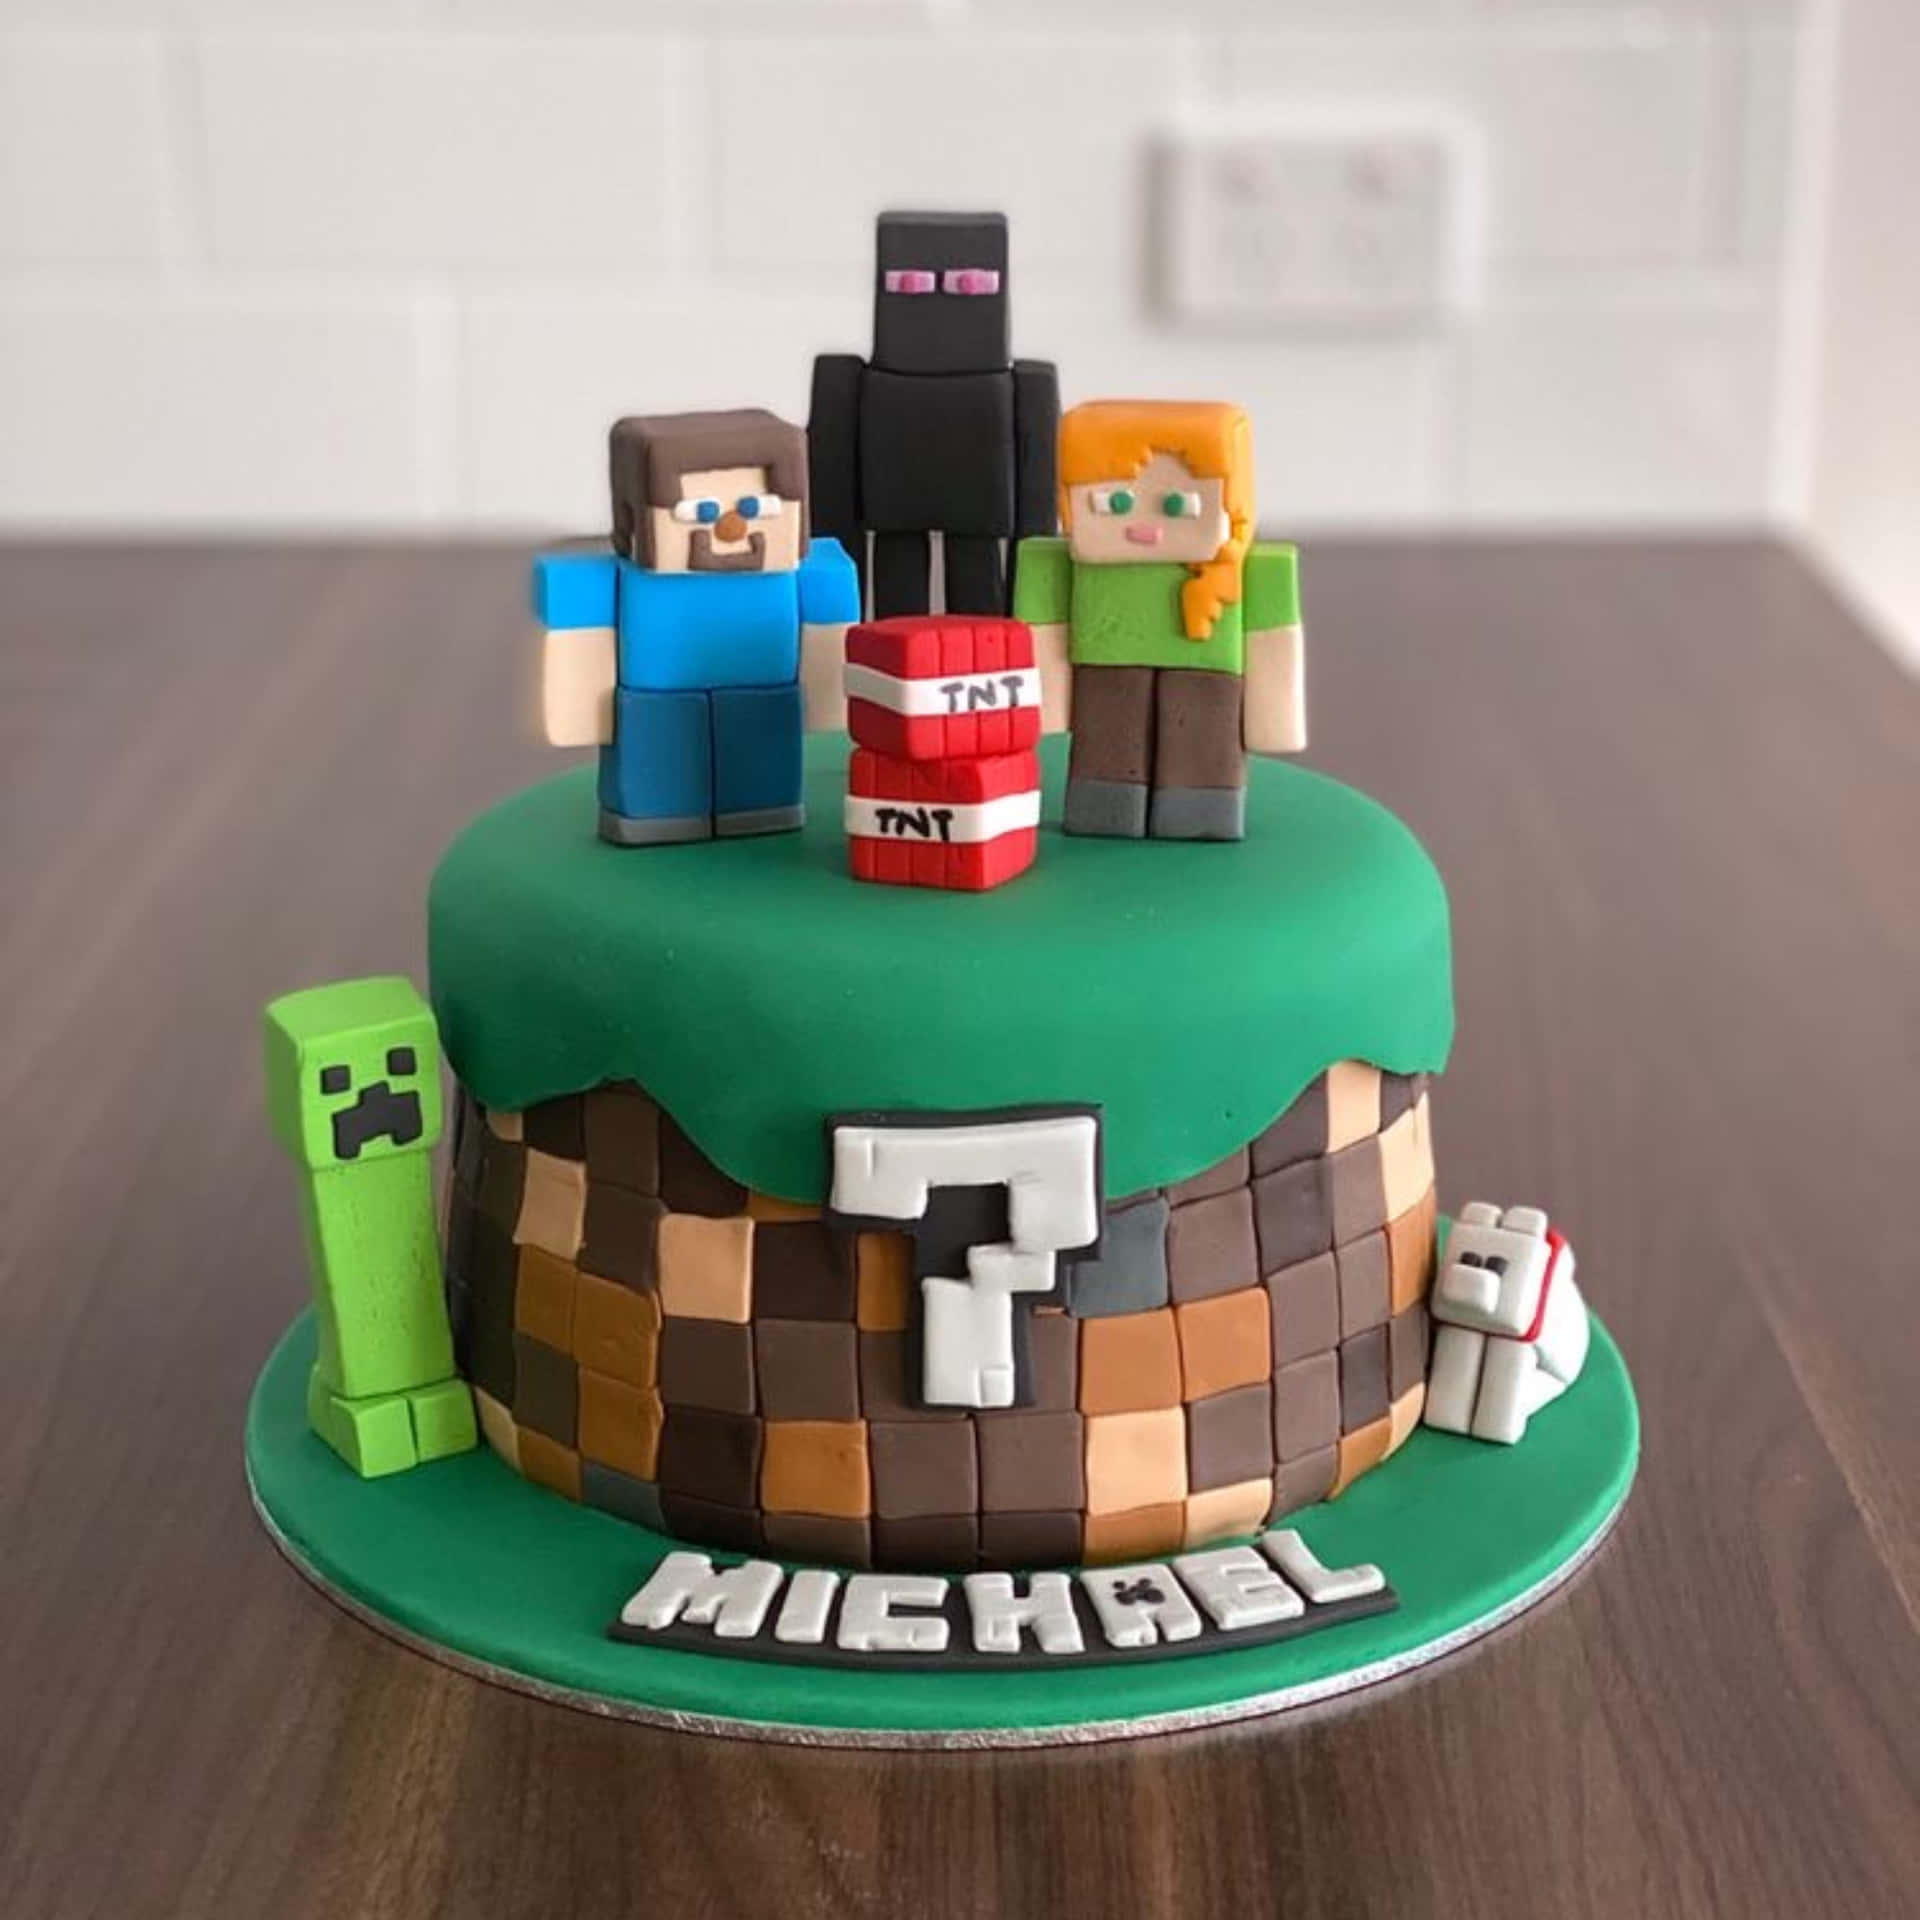 Deliciously Delectable - Custom Minecraft Cakes to Celebrate!